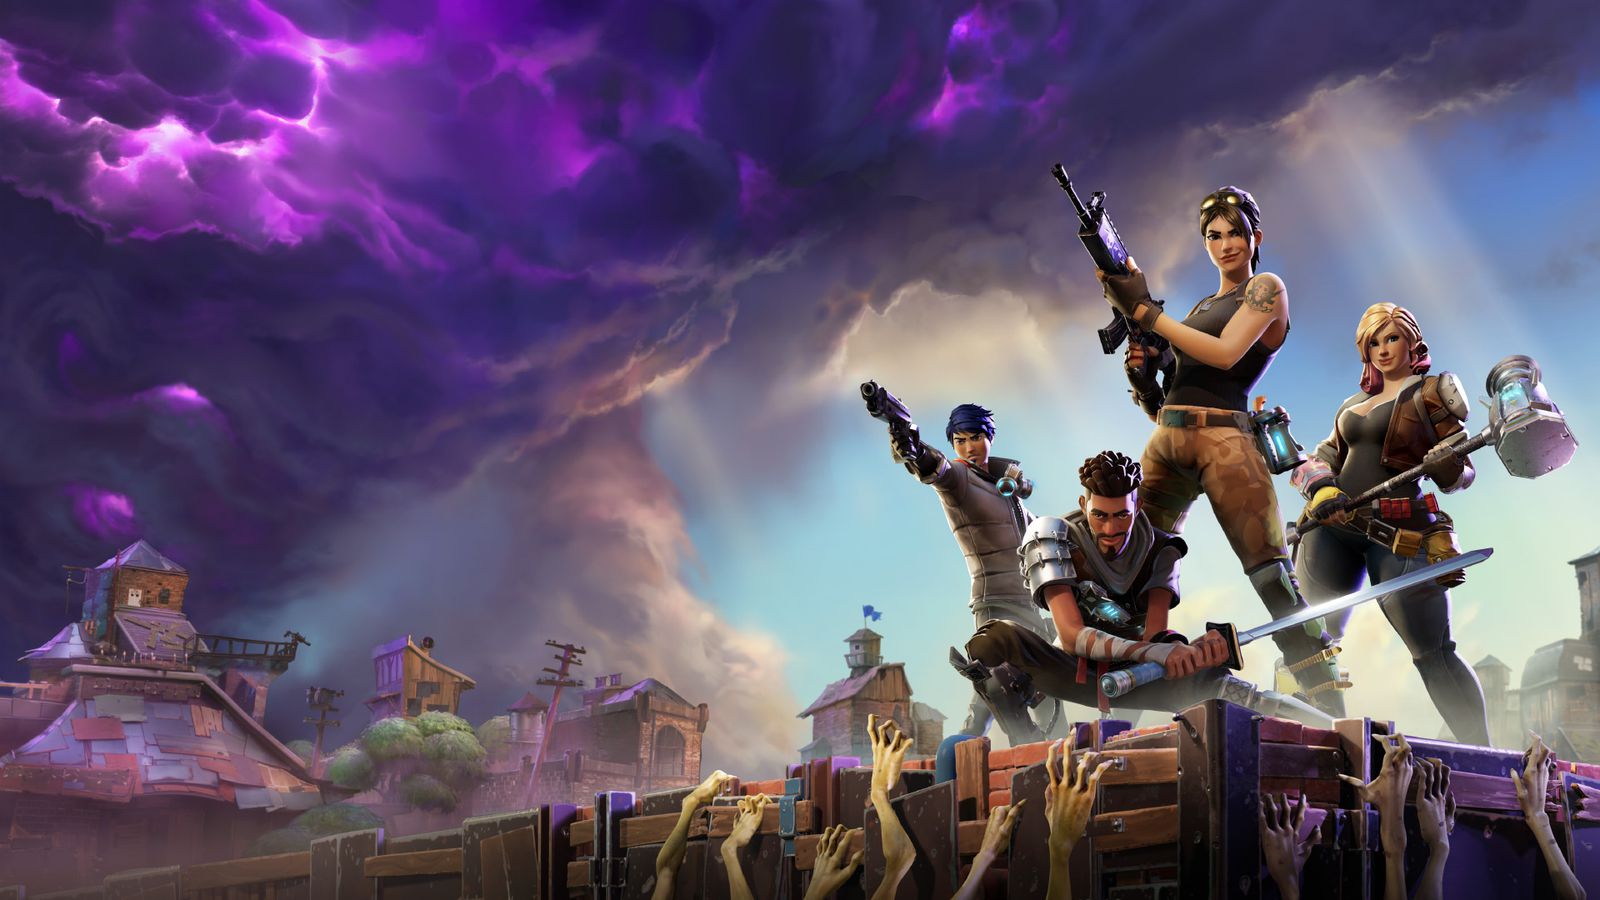 How To Claim Free Twitch Prime Loot In Fortnite Battle Royale Windows Central